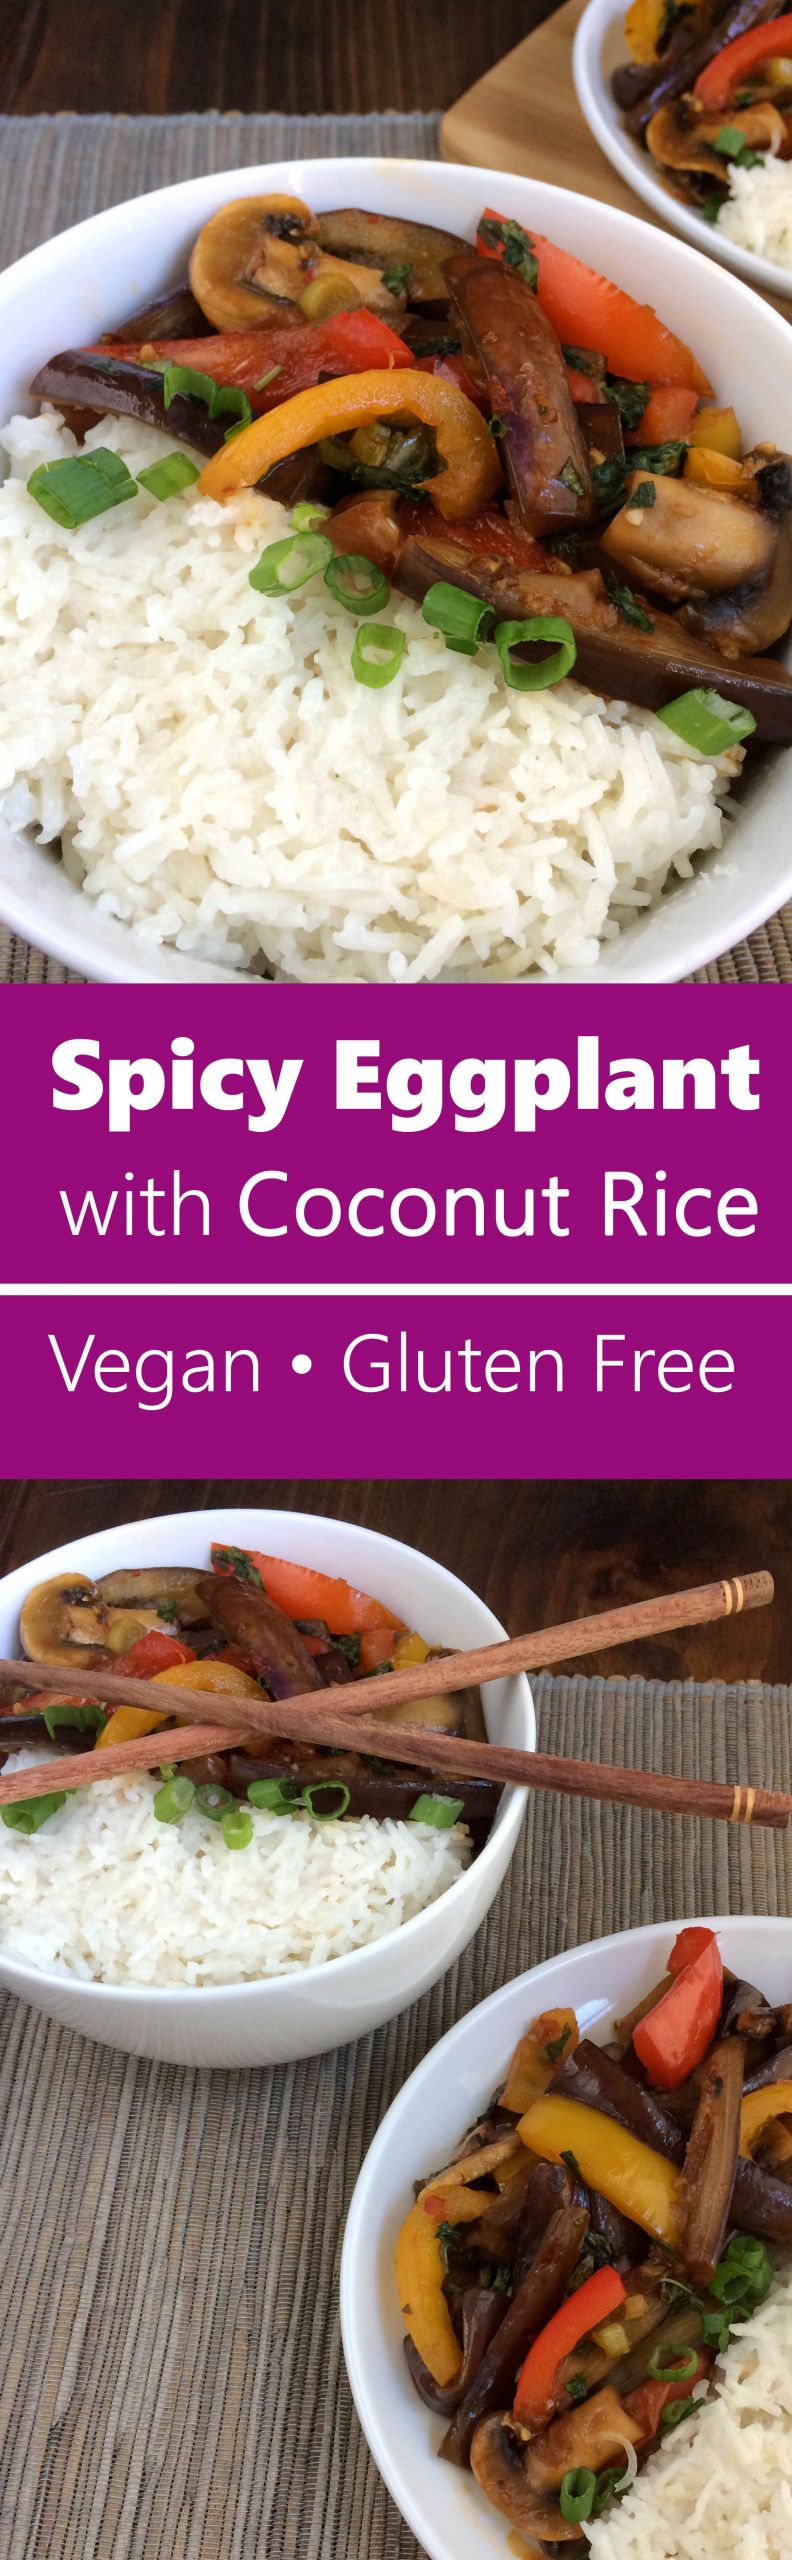 Vegetarian Recipes For Baby
 Spicy Eggplant with Coconut Rice Recipe Vegan Gluten Free